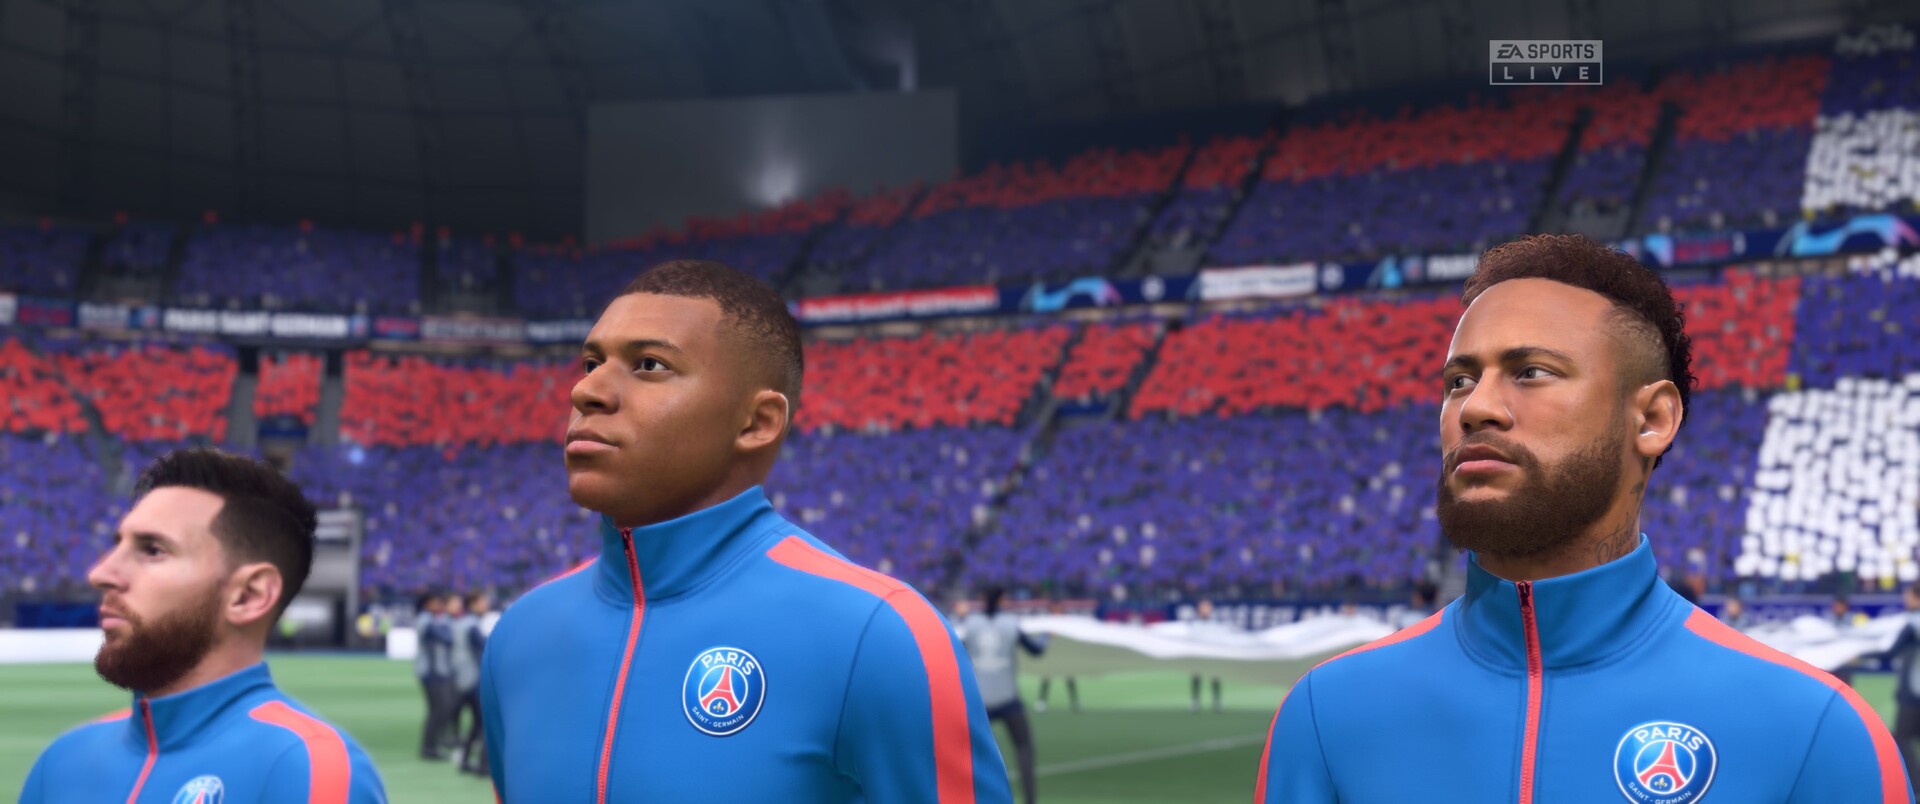 FIFA 22 in test: Notebook and desktop benchmarks - NotebookCheck